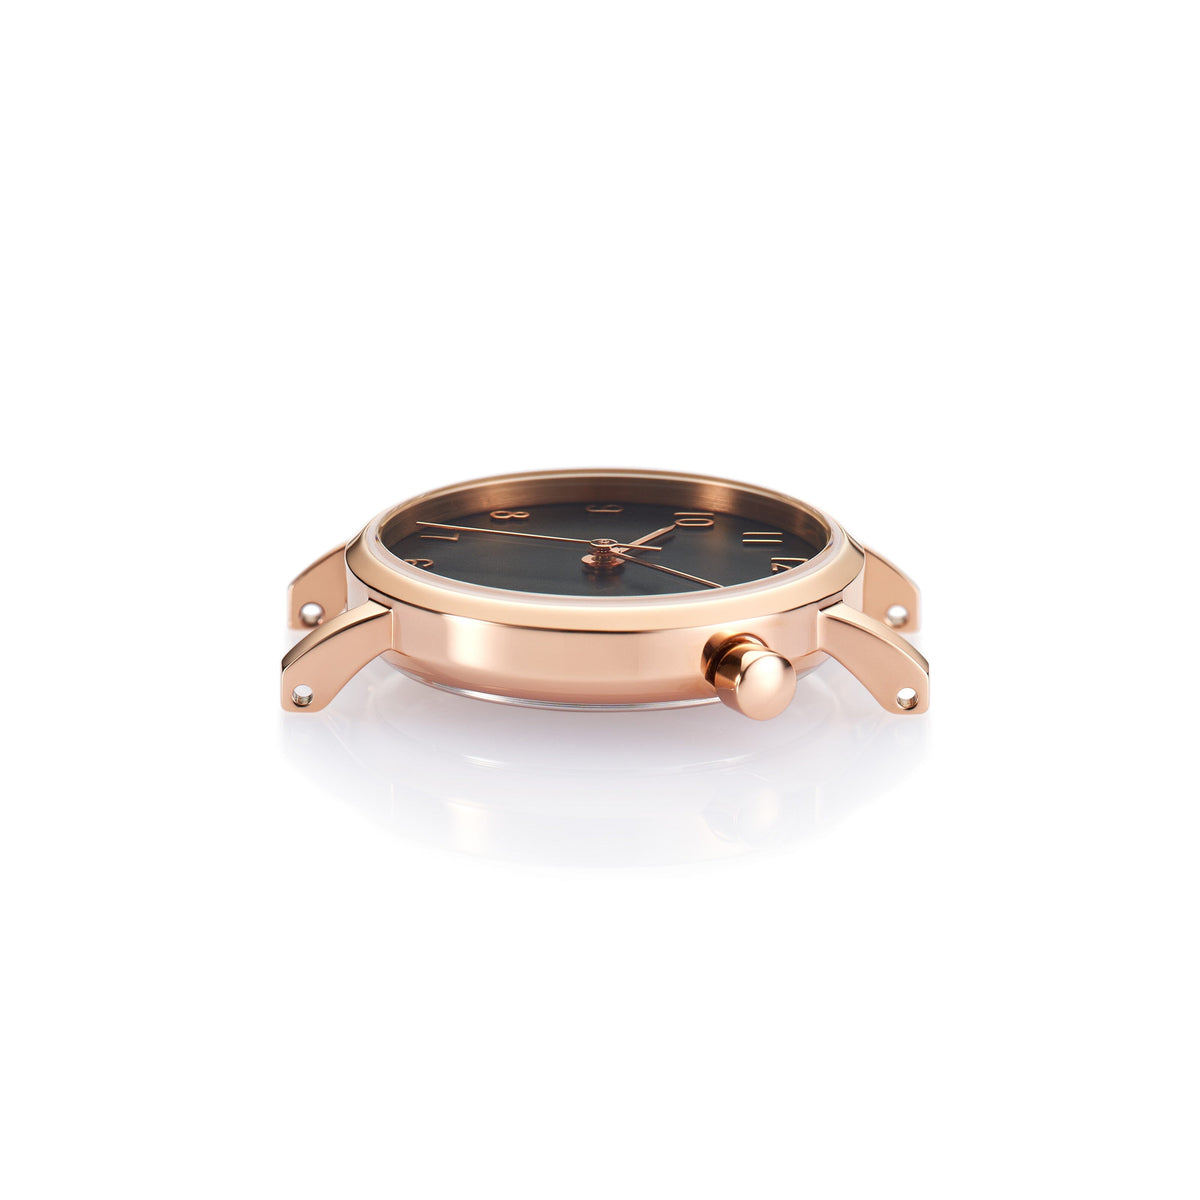 The Black and Rose Gold Watch -  Fruity (Kids)